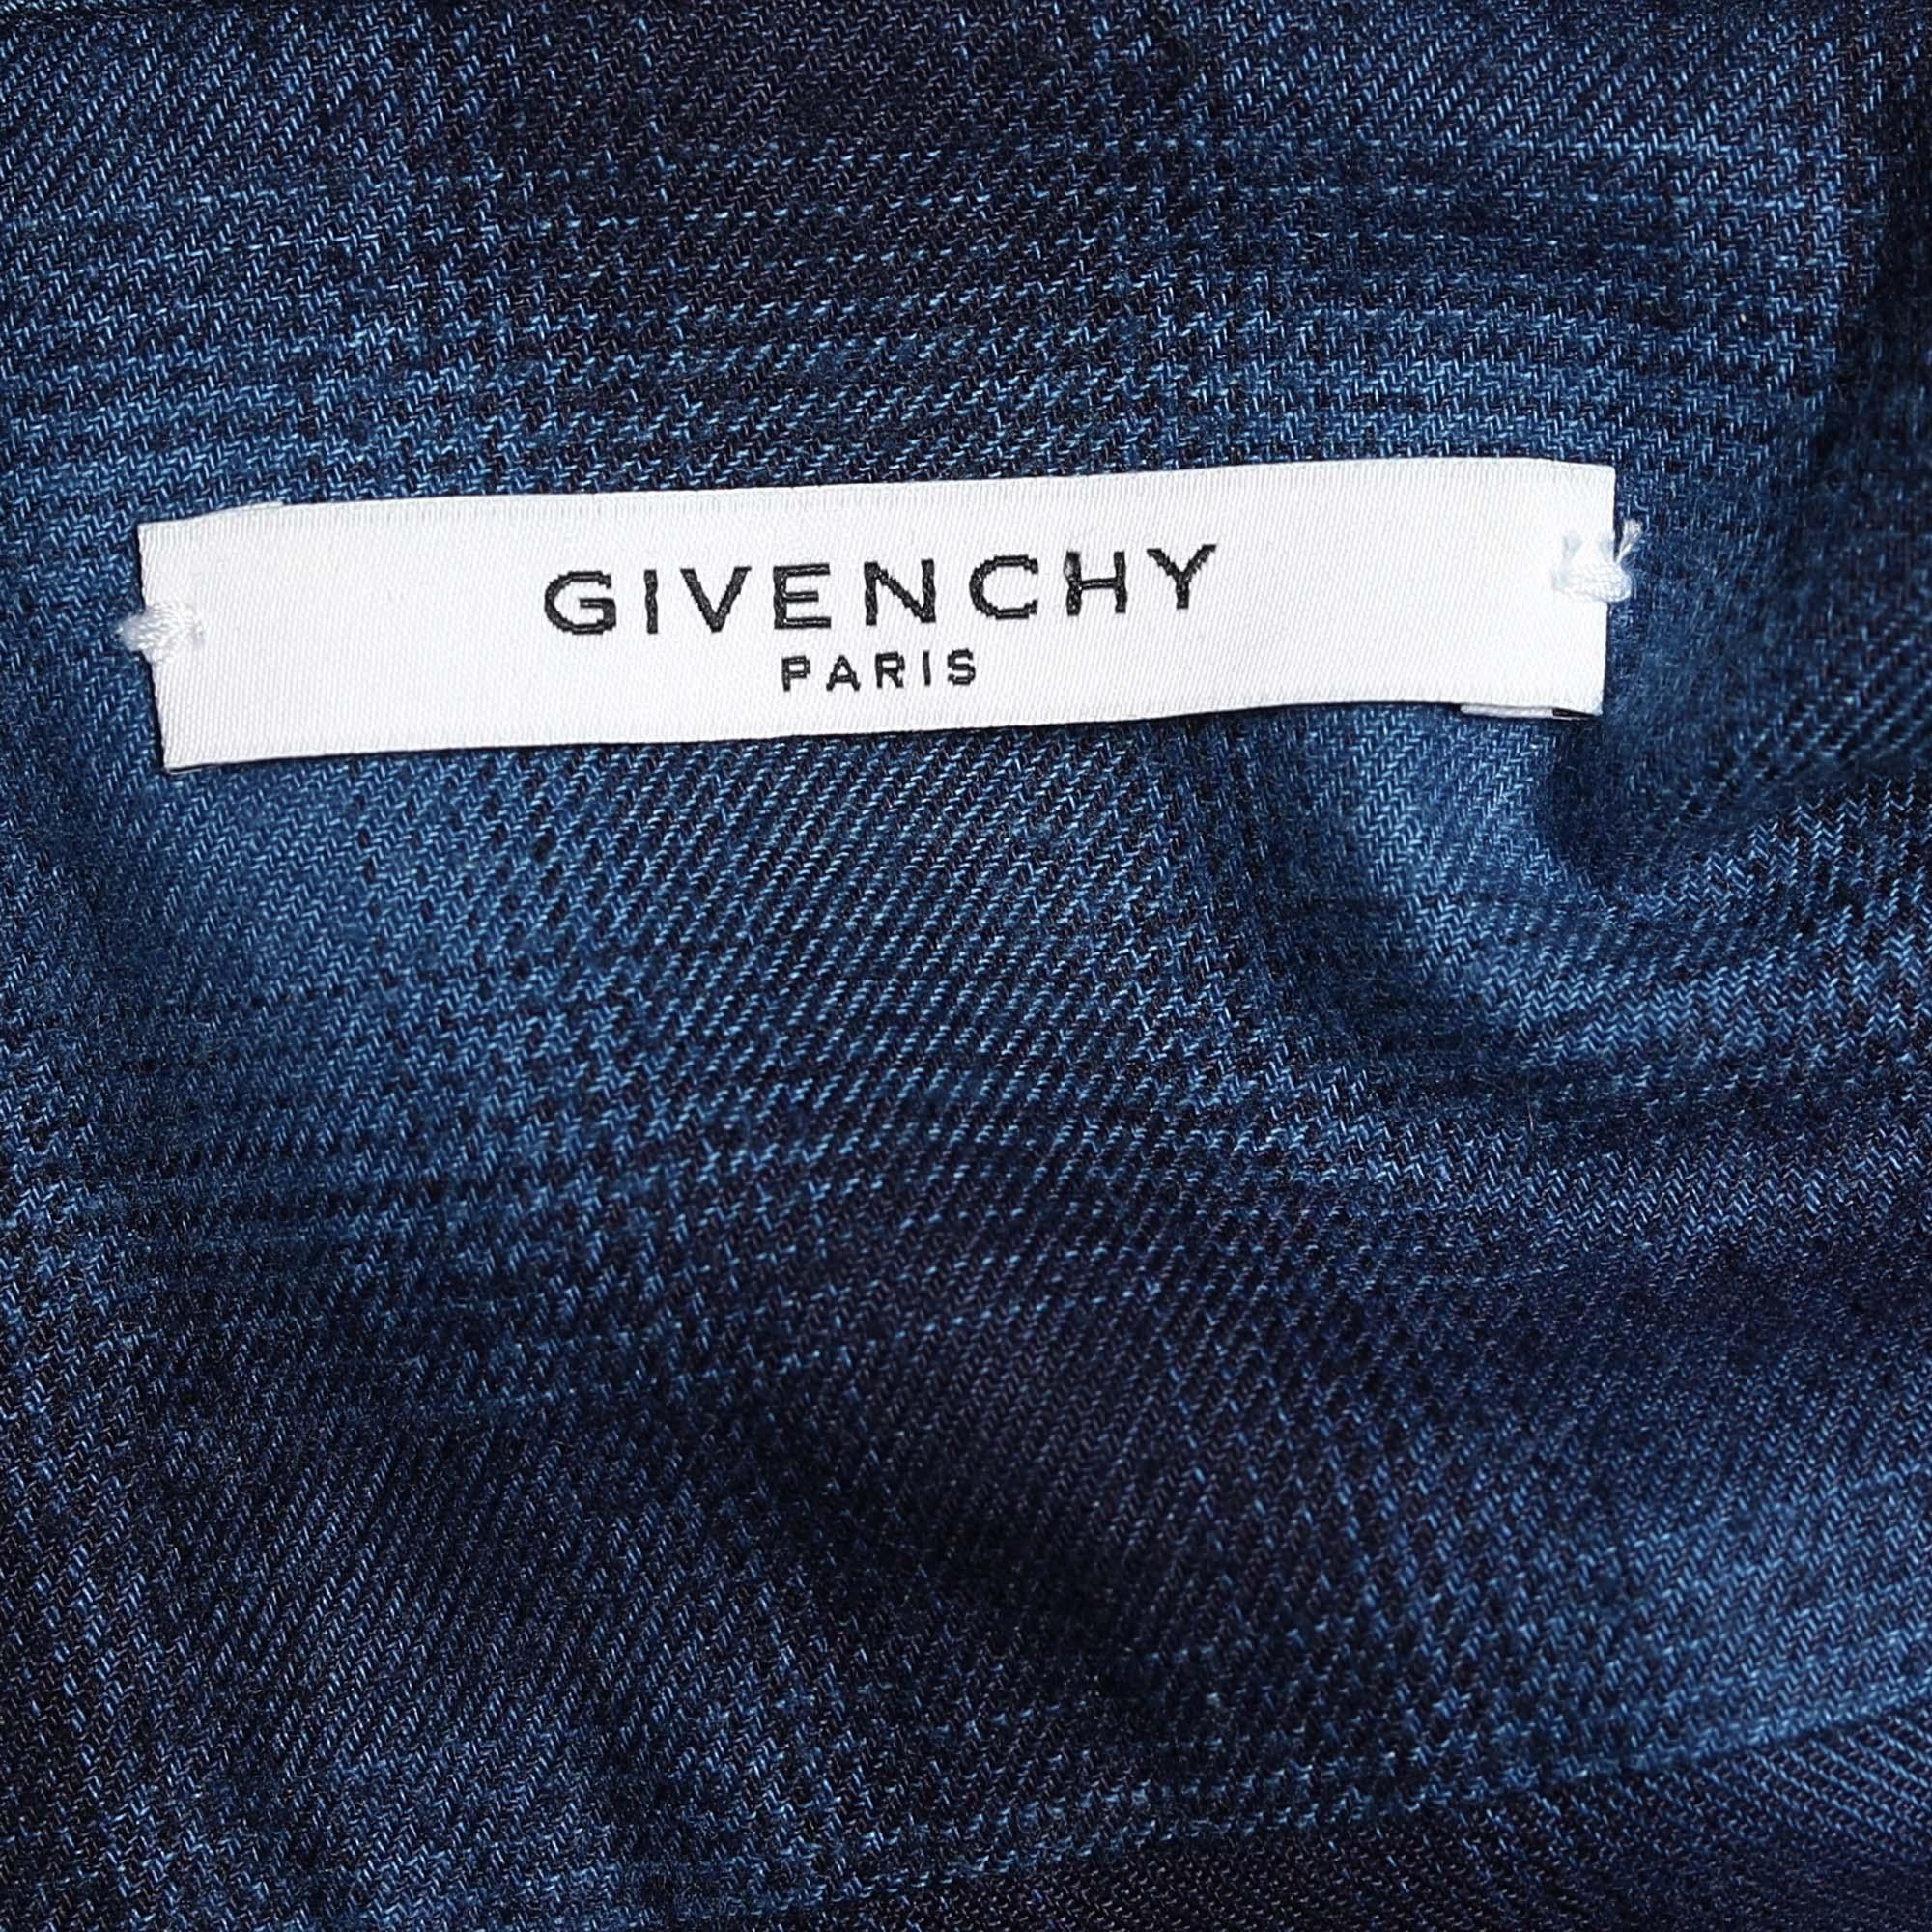 Givenchy Navy Blue Plaid Flannel Stars Patch Long Sleeve Shirt M 1